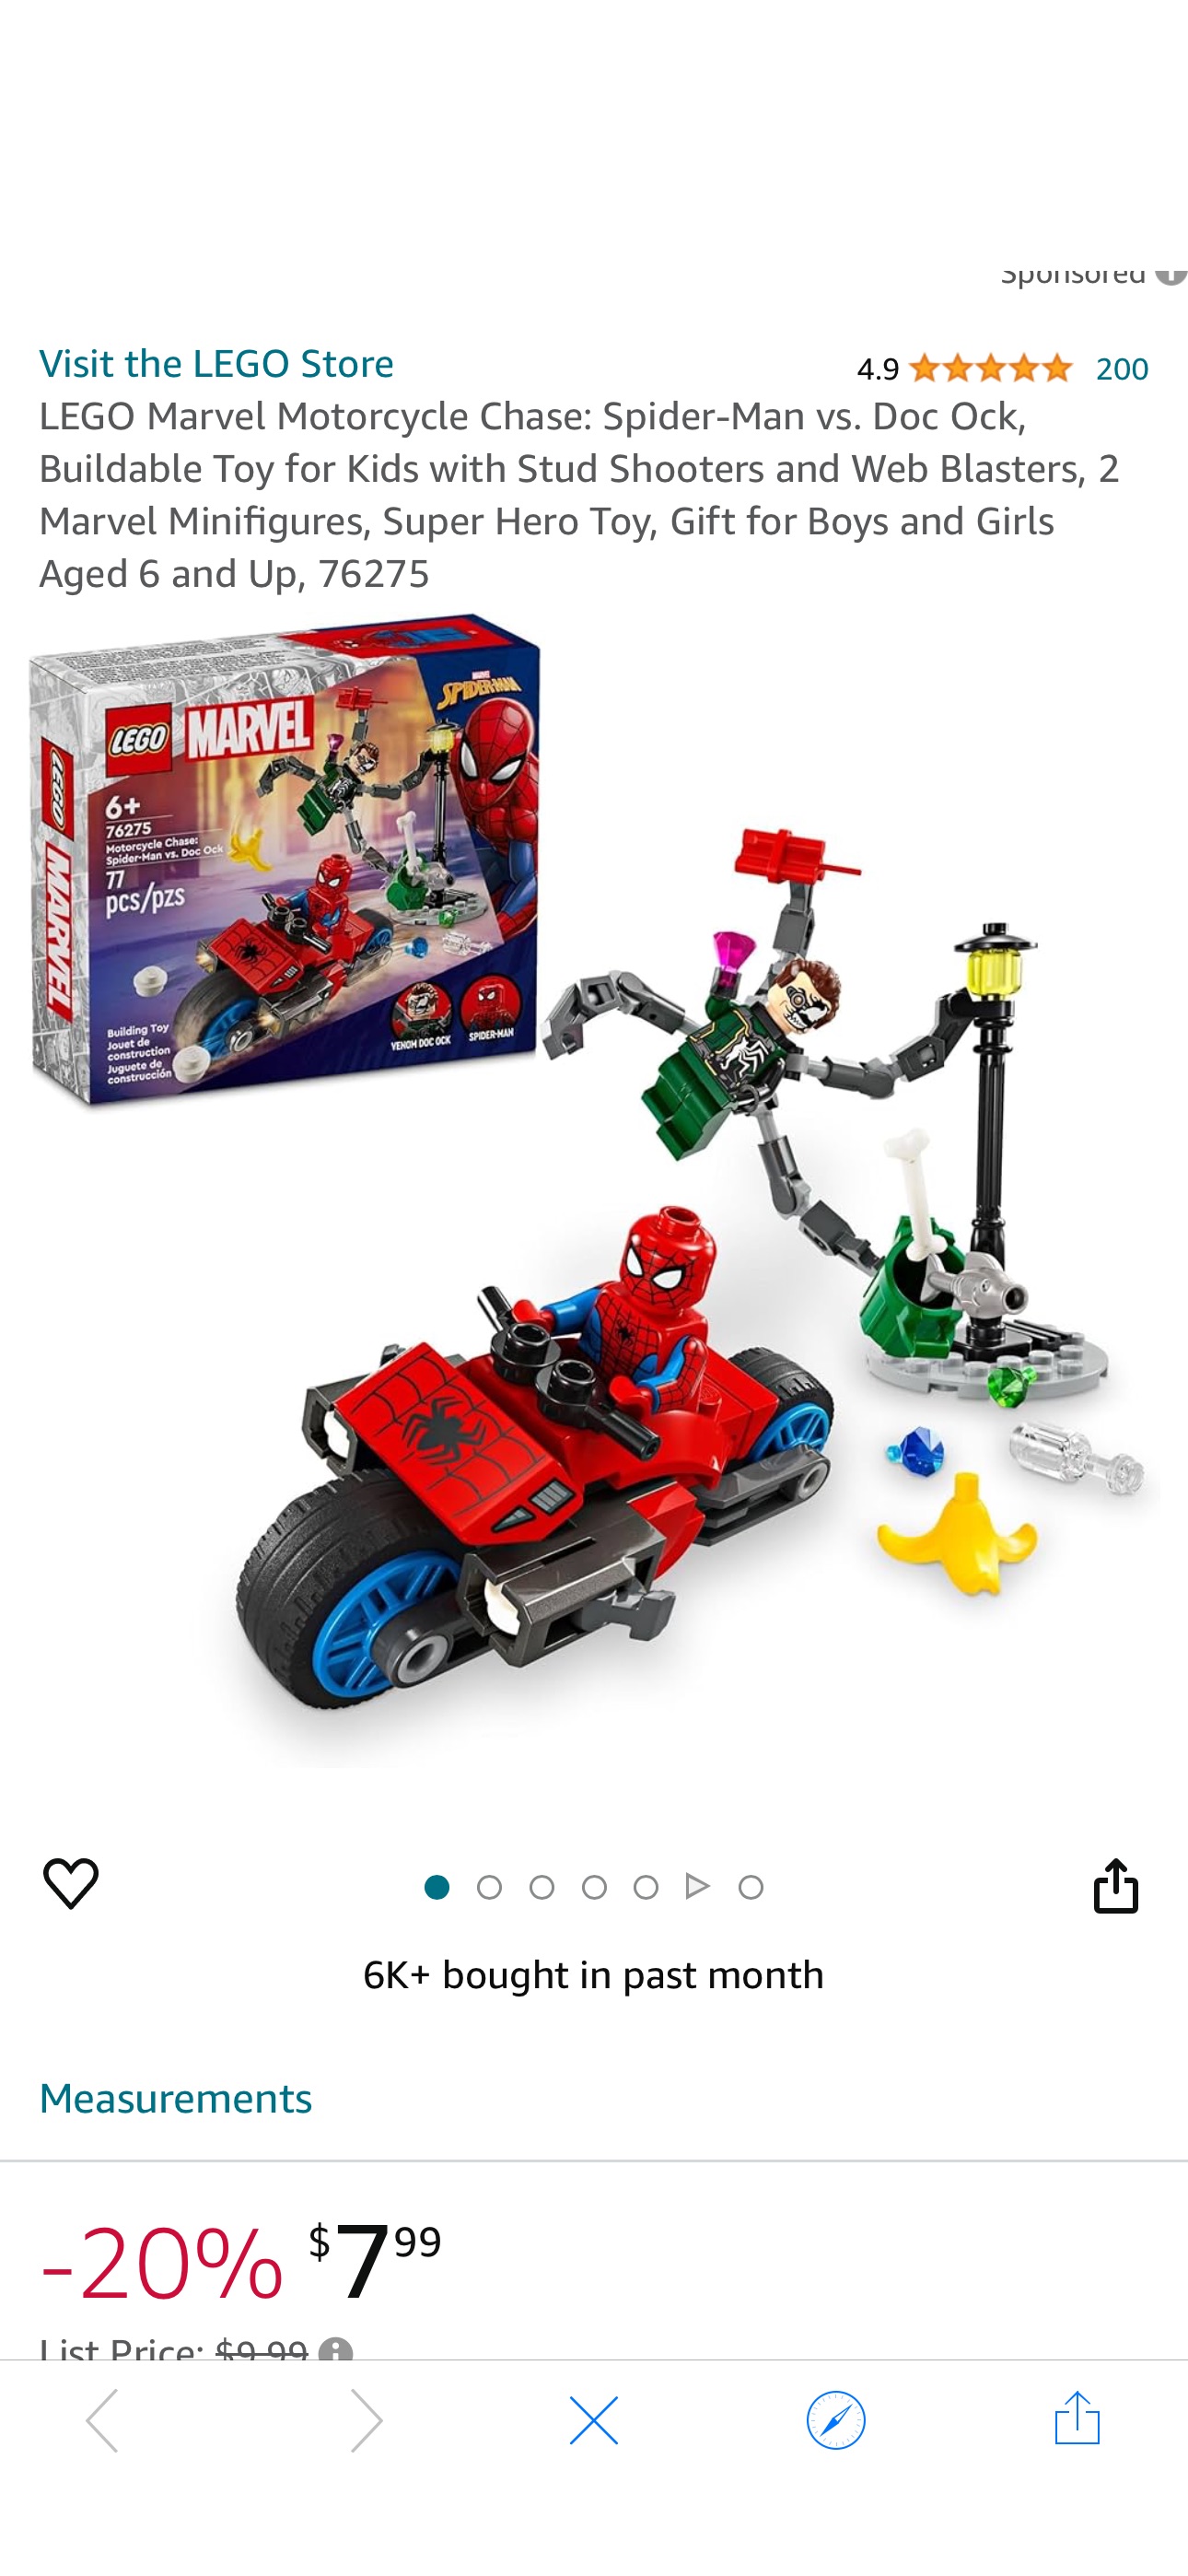 Amazon.com: LEGO Marvel Motorcycle Chase: Spider-Man vs. Doc Ock, Buildable Toy for Kids with Stud Shooters and Web Blasters, 2 Marvel Minifigures, Super Hero Toy, Gift for Boys and Girls Aged 6 and U